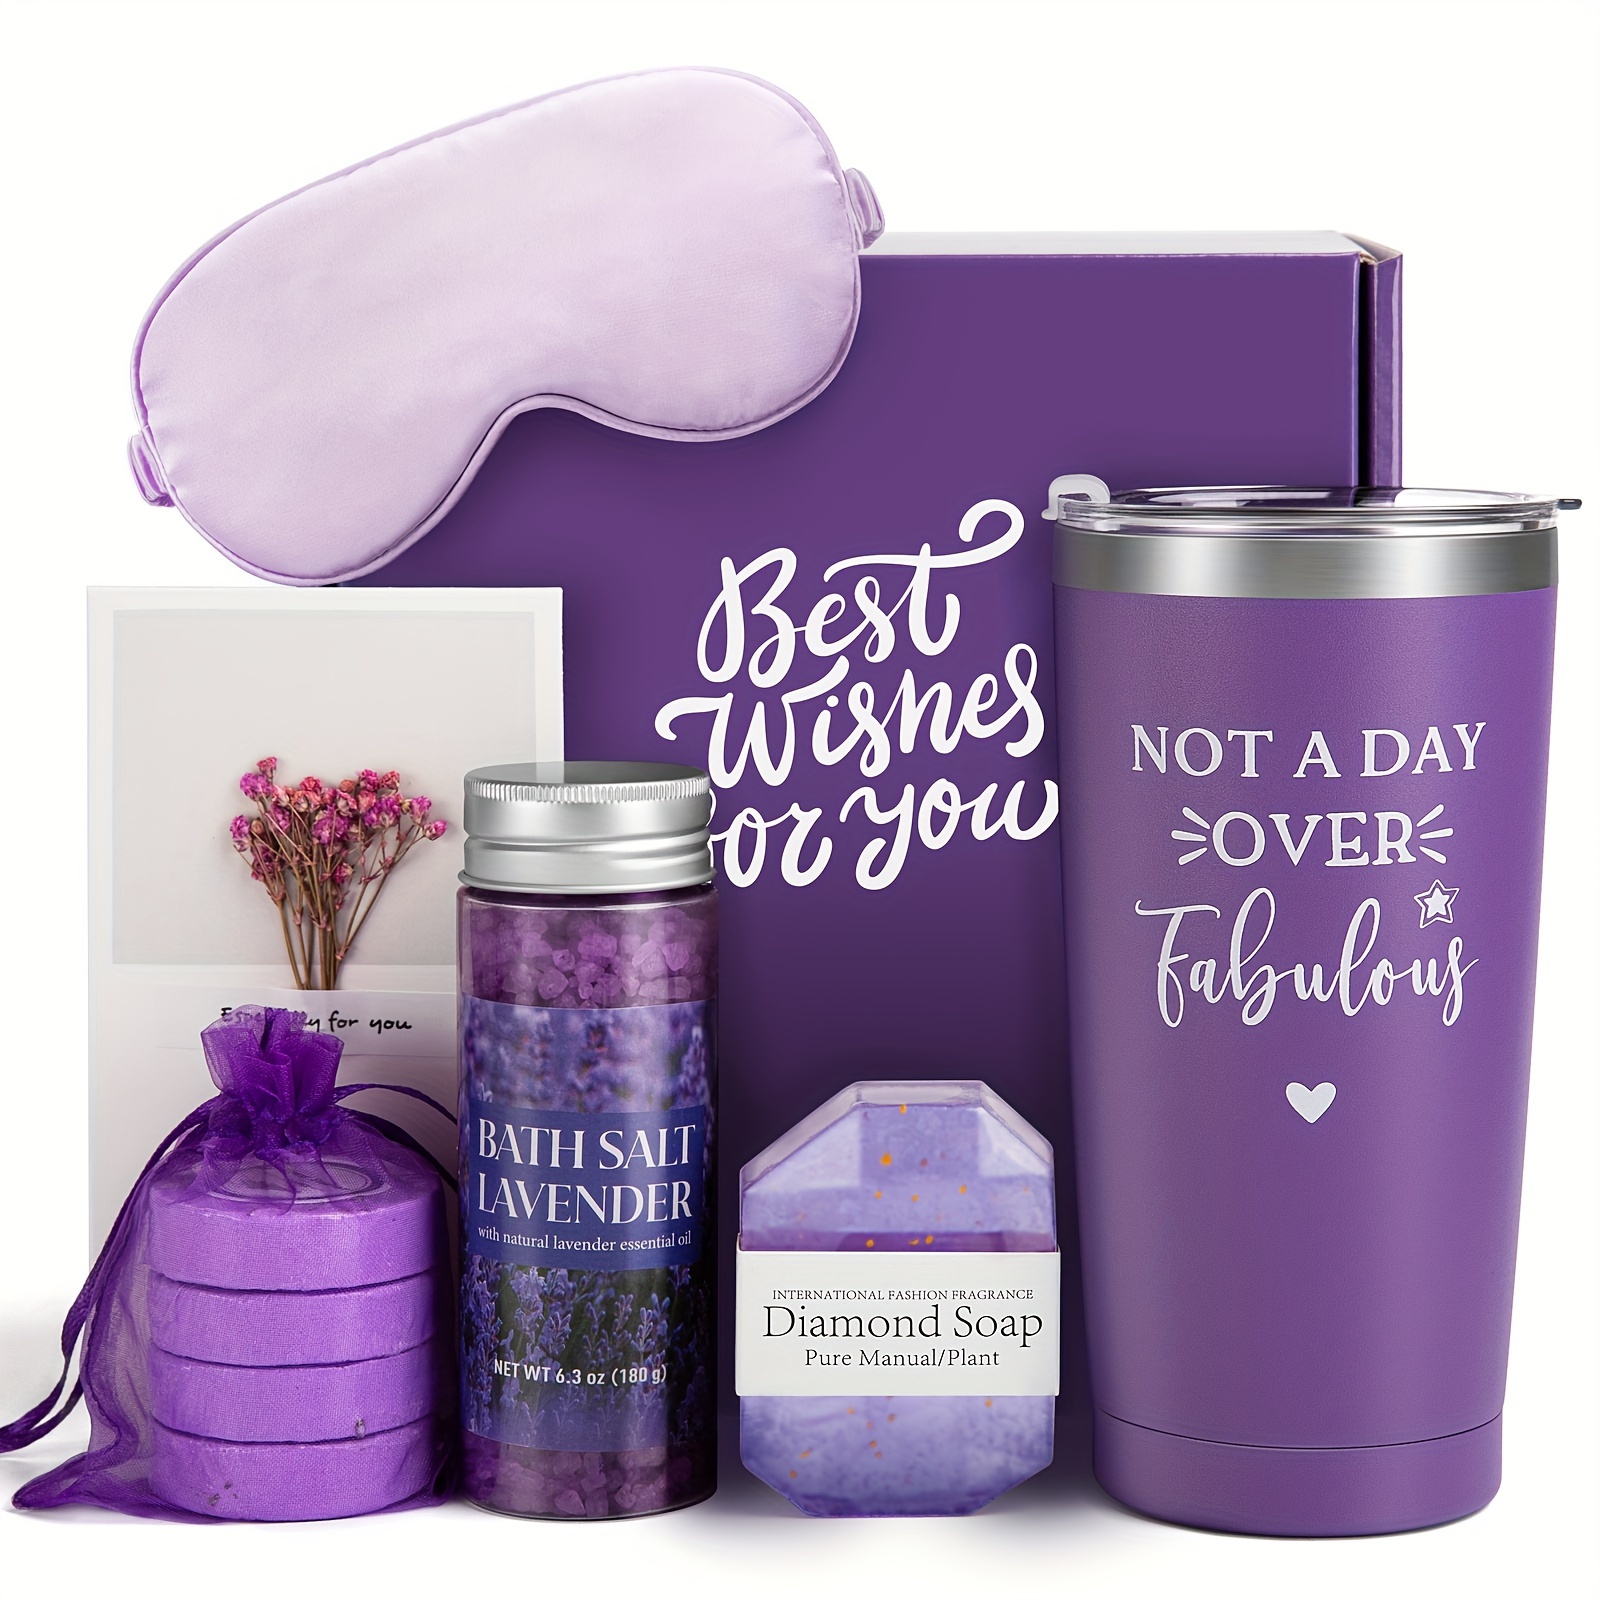 Gifts For Women,Happy Birthday Gifts For Women,Unique Gift Ideas Baskets  For Women,Mom,Sister,Includes Tumbler,Guasha Tools,Bracelet